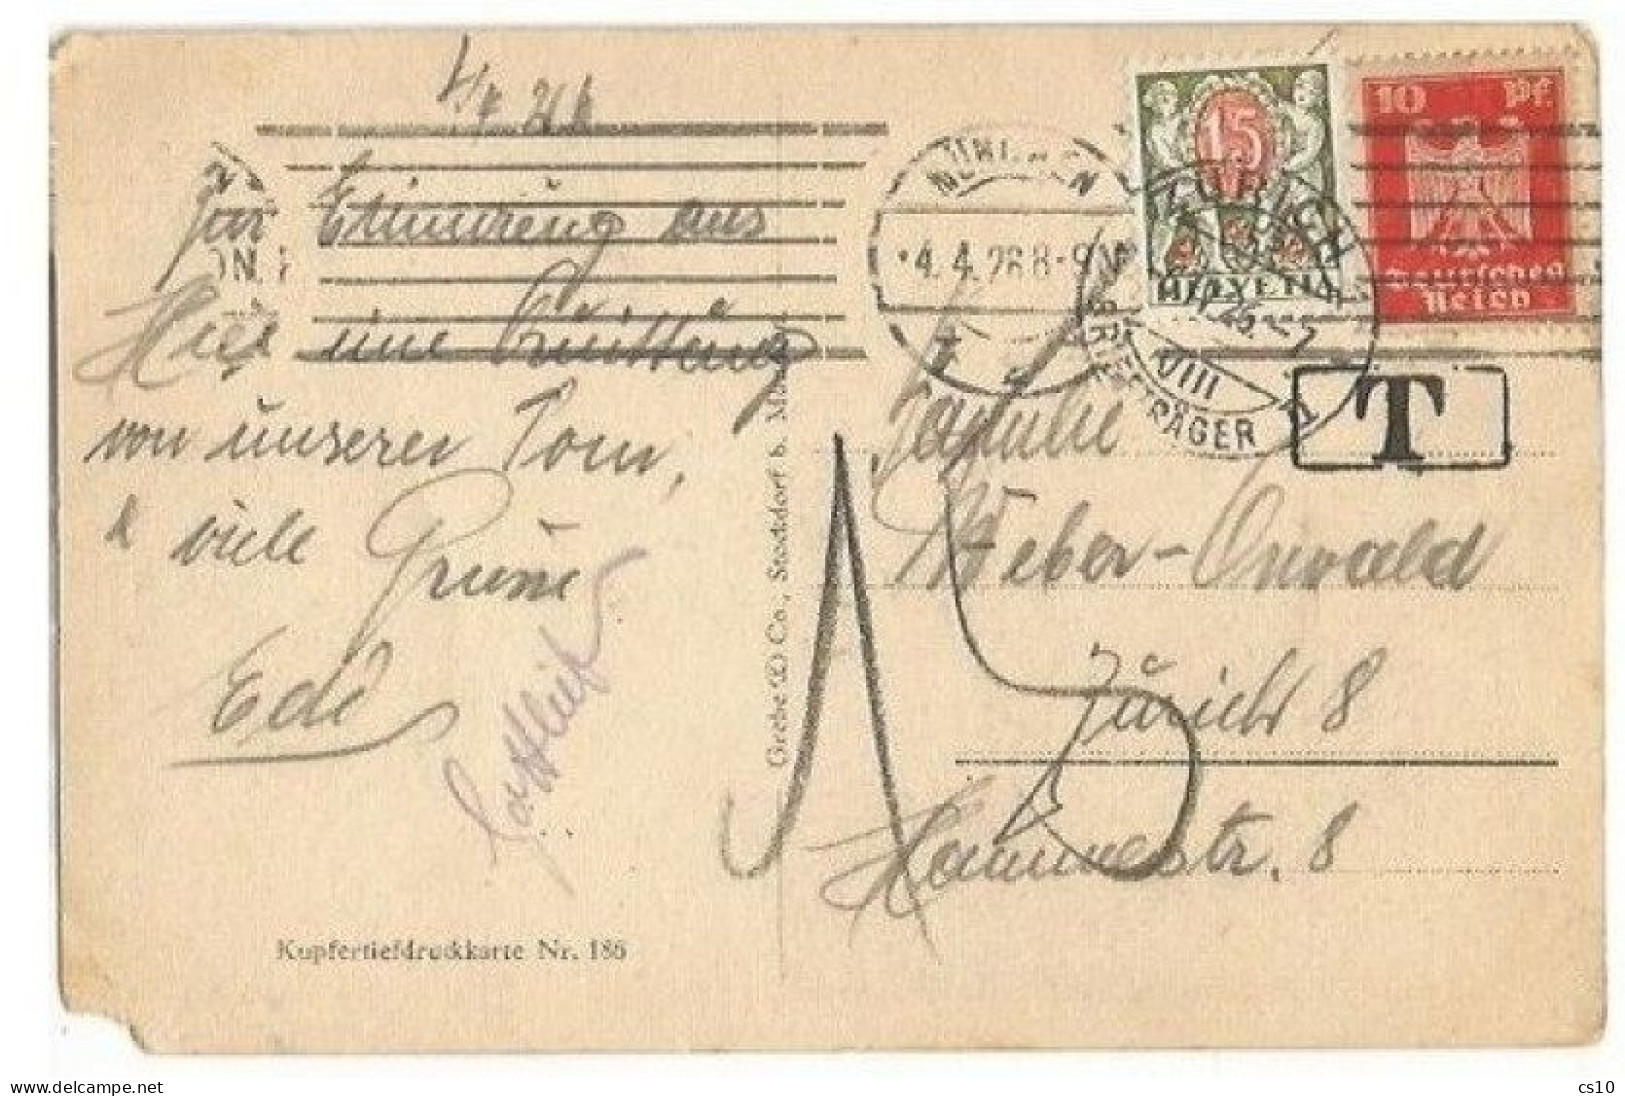 Suisse 6apr1926 Postage Due C.15 Taxing Pcard Munchen 4apr With Eagle Pf10 Solo To Zurich - Strafportzegels